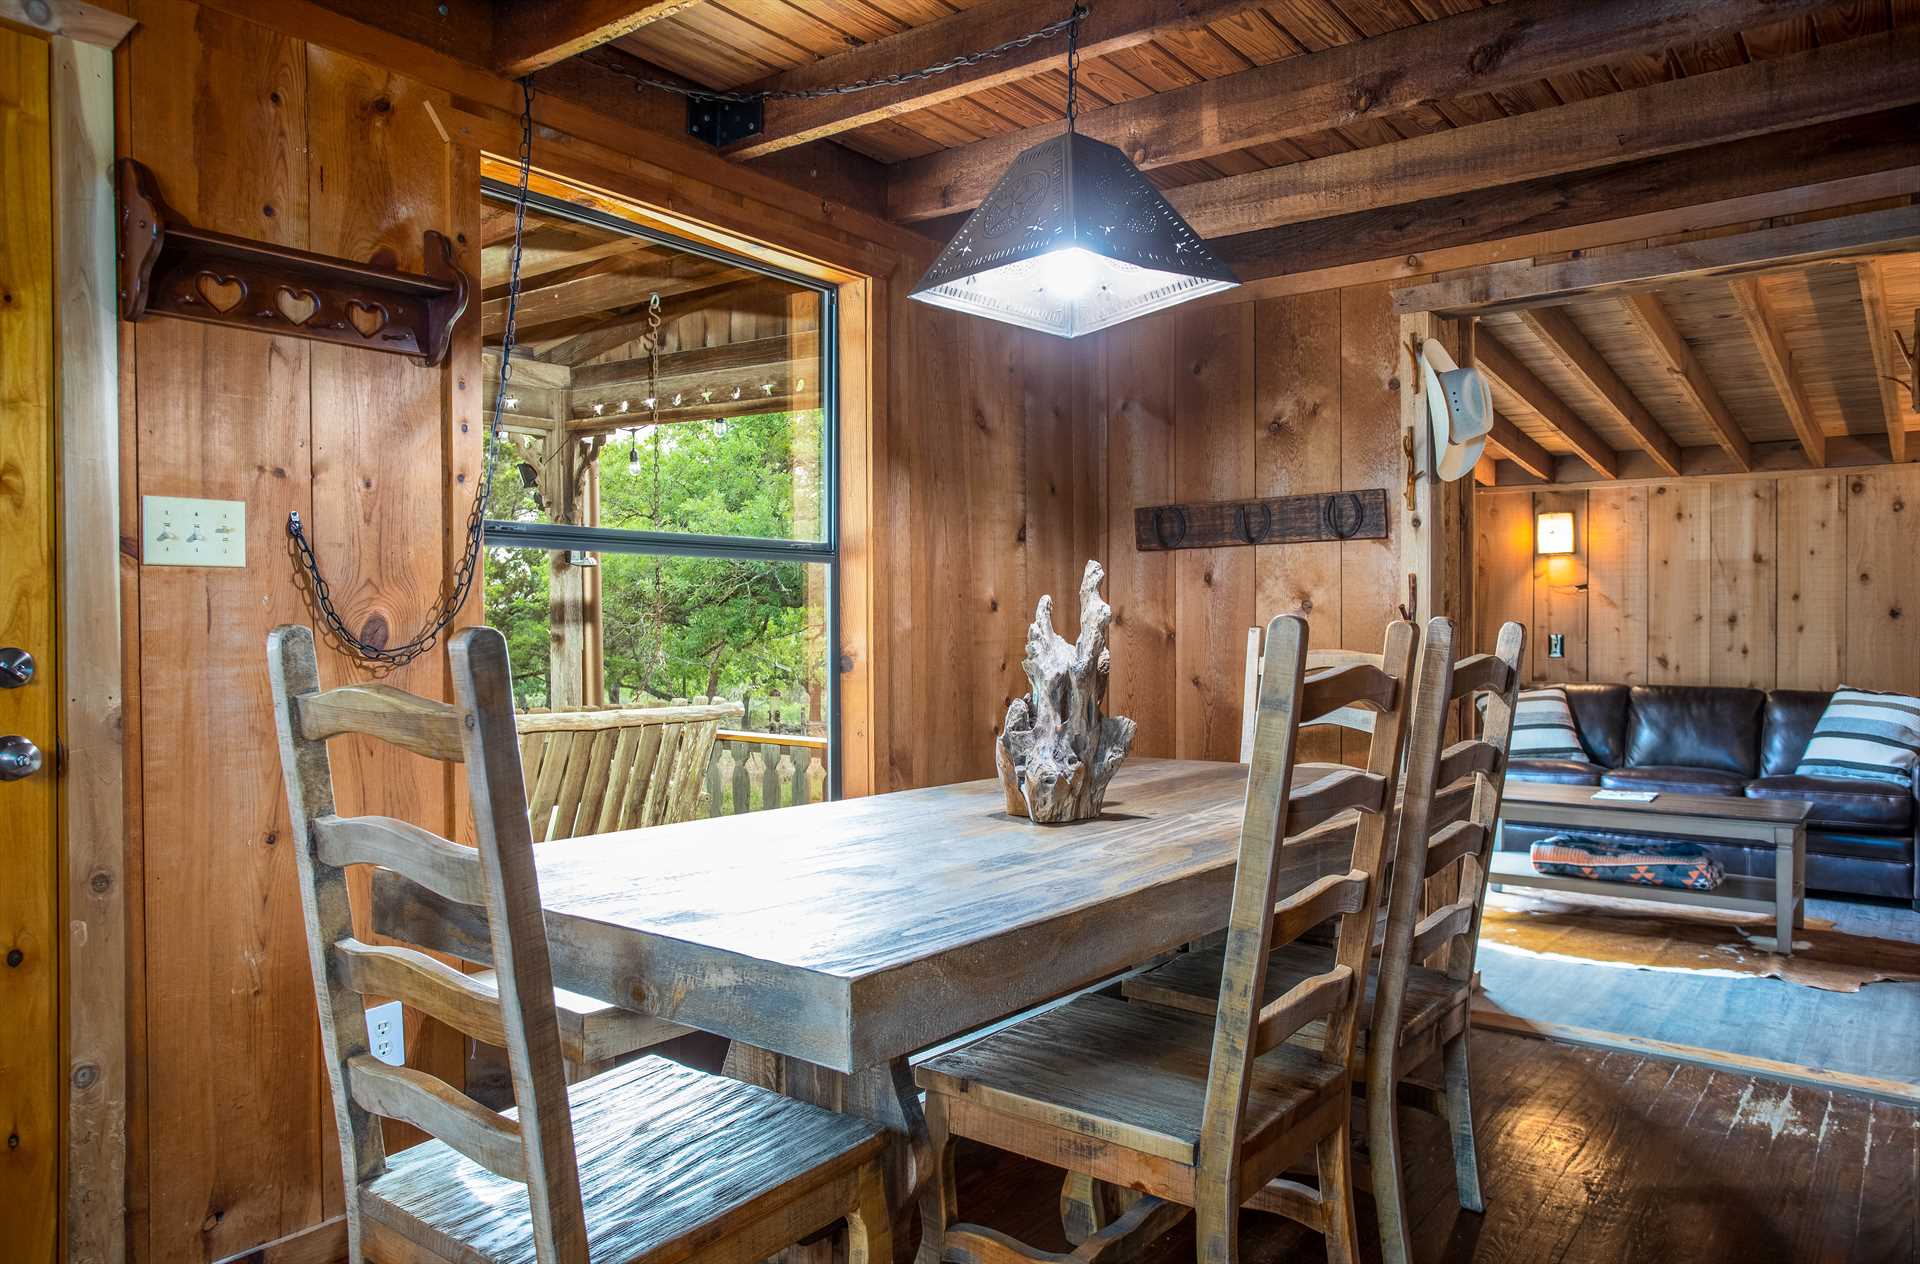                                                 A big window lets you enjoy those picturesque Hill Country views while you're dining!